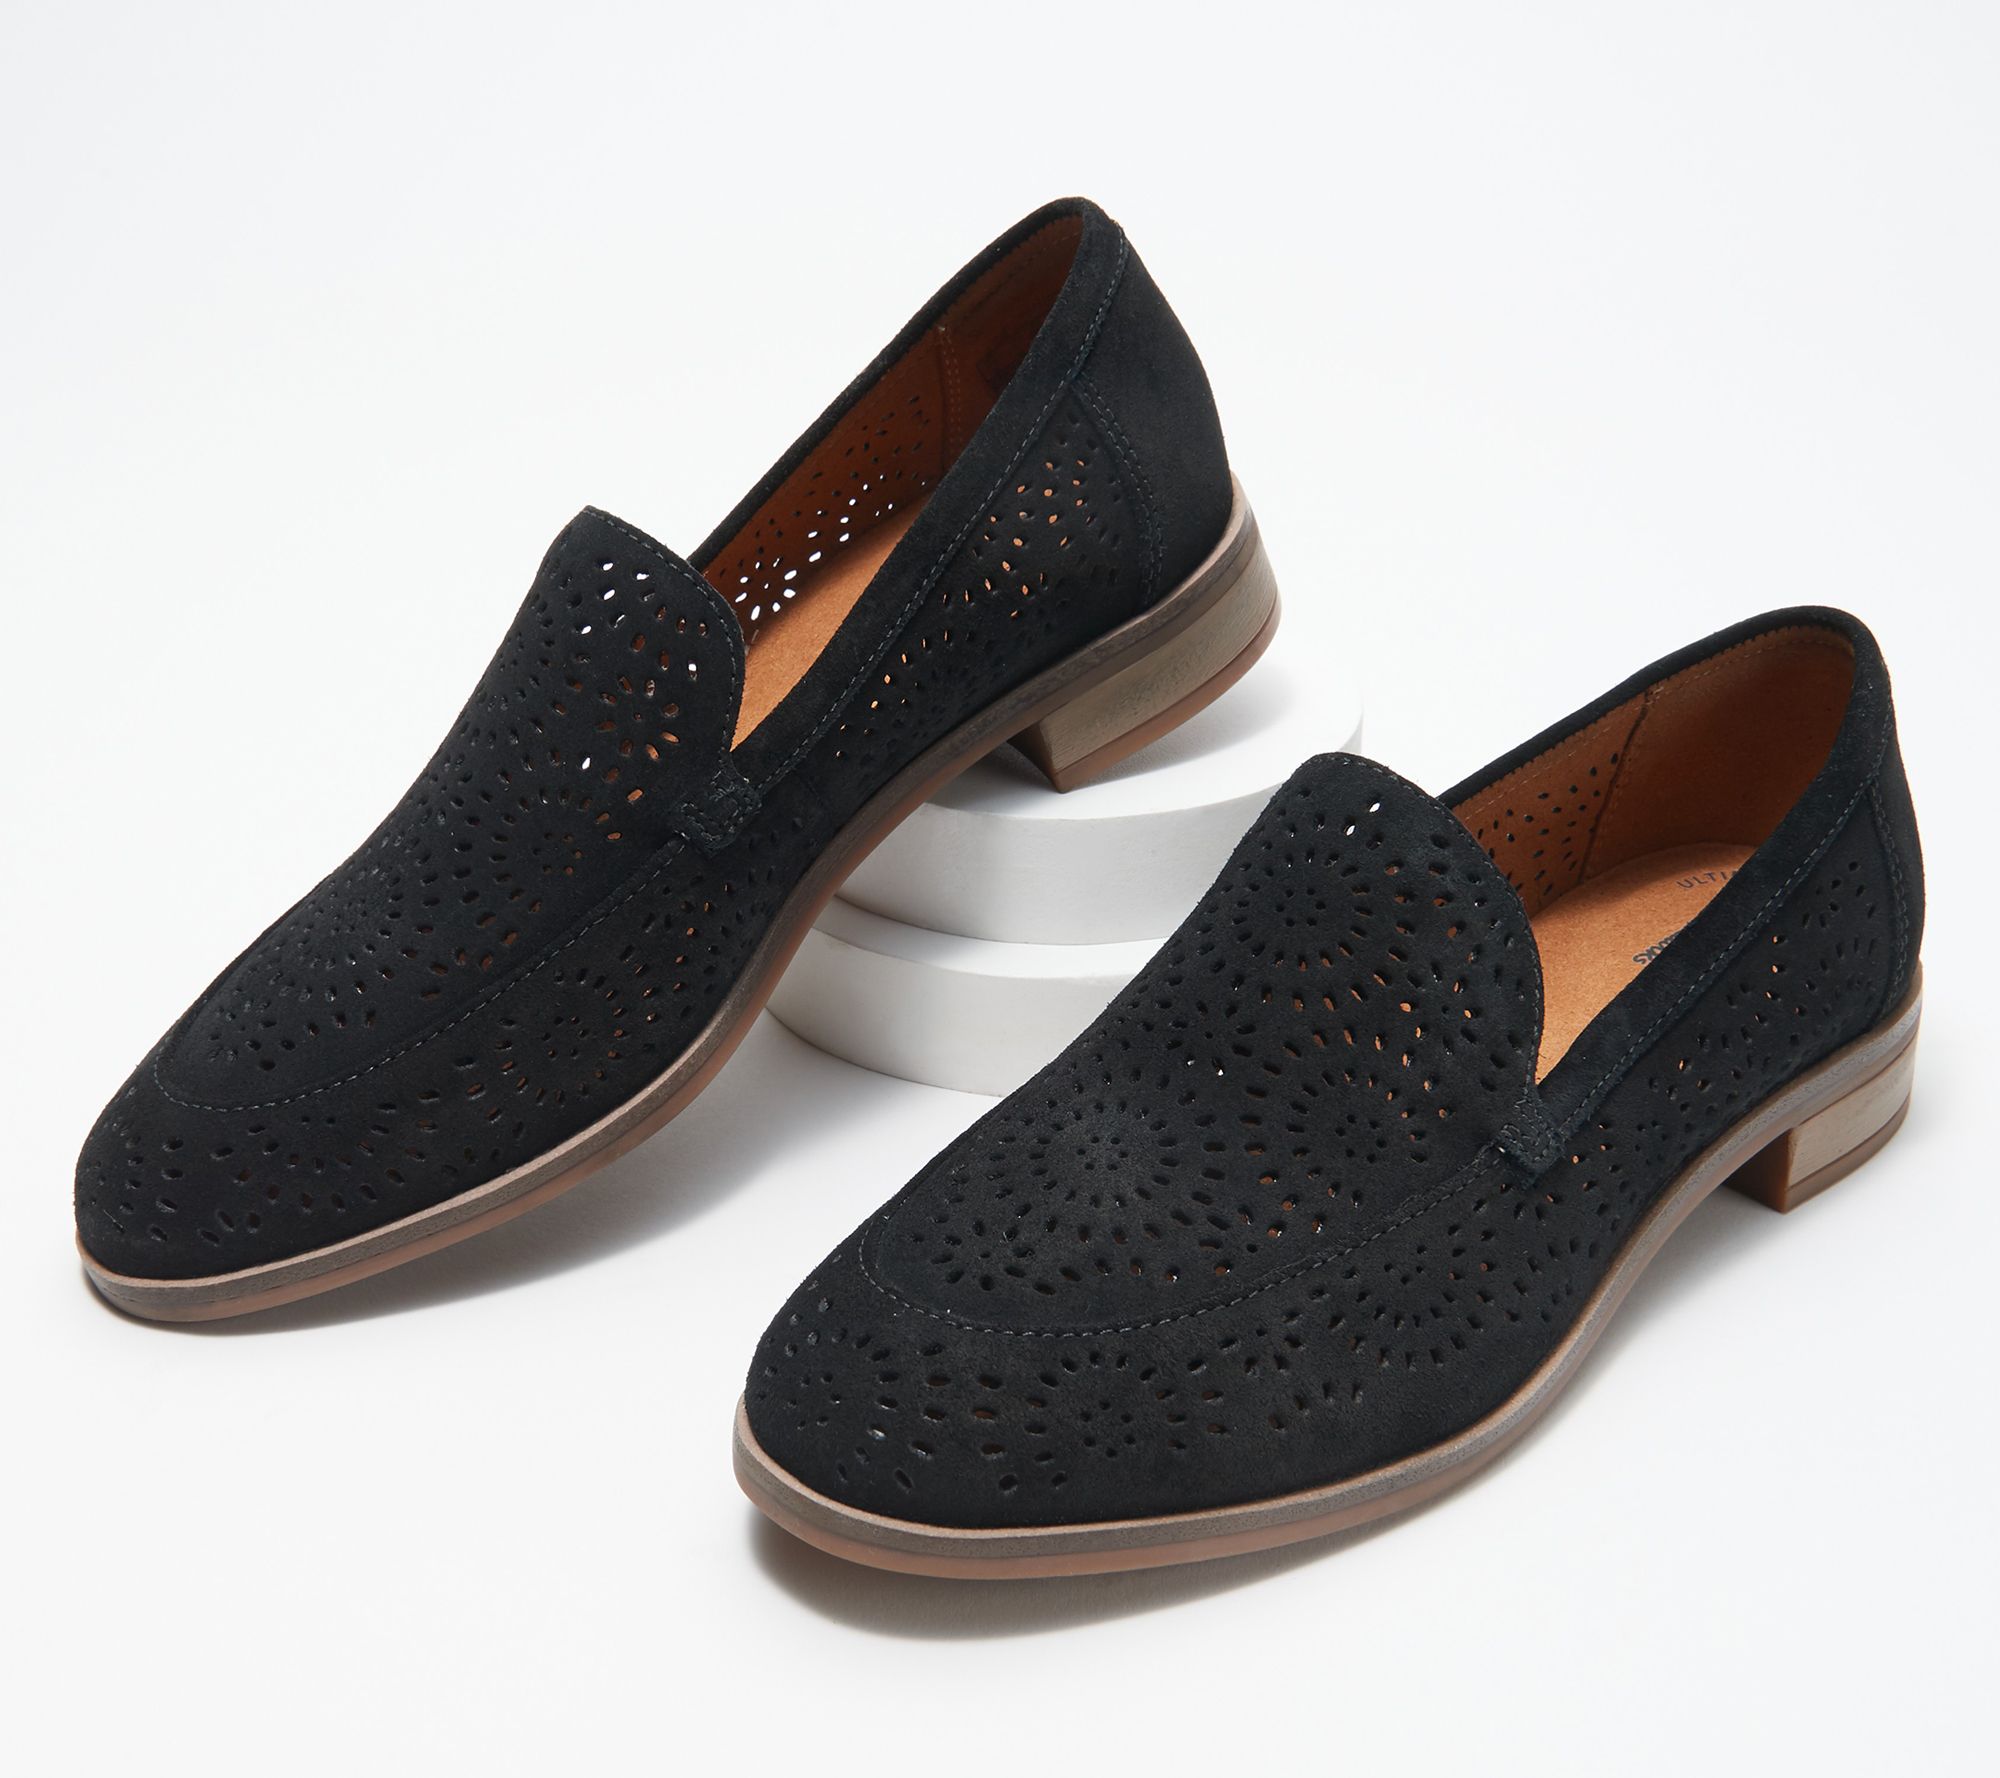 Clarks Collection Perforated Suede Loafers - Trish Calla - QVC.com